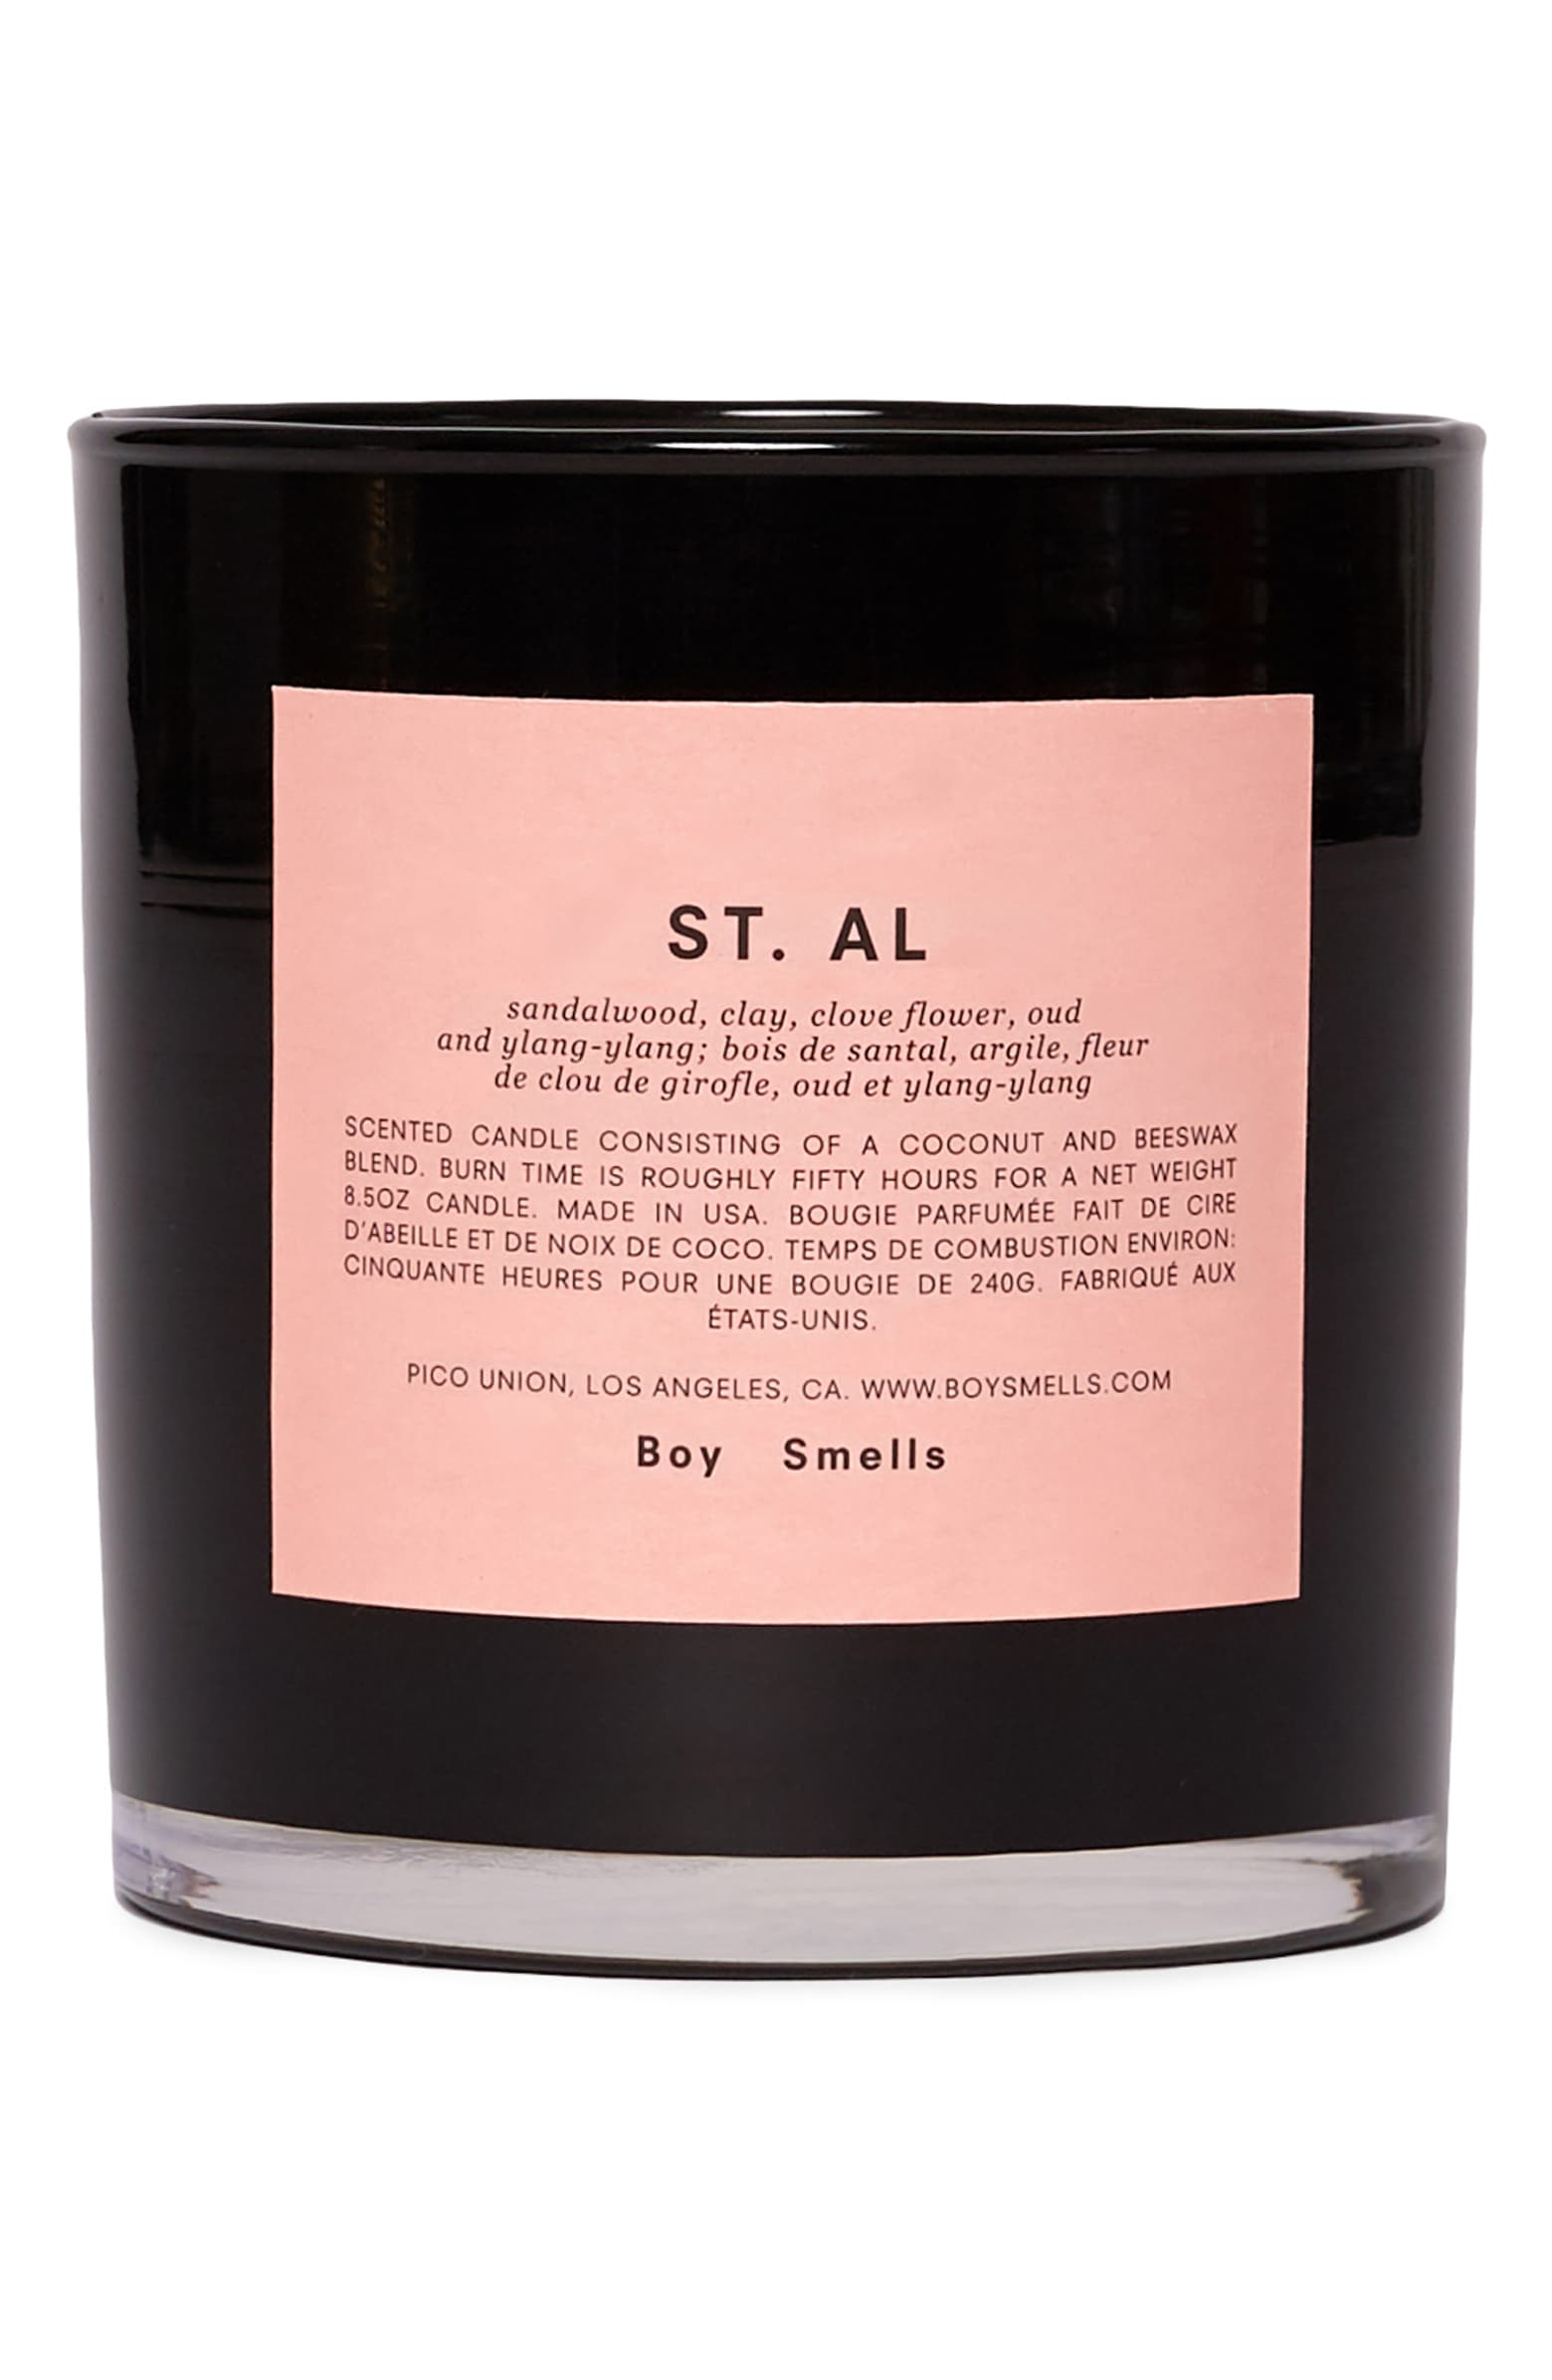 St. Al Scented Candle